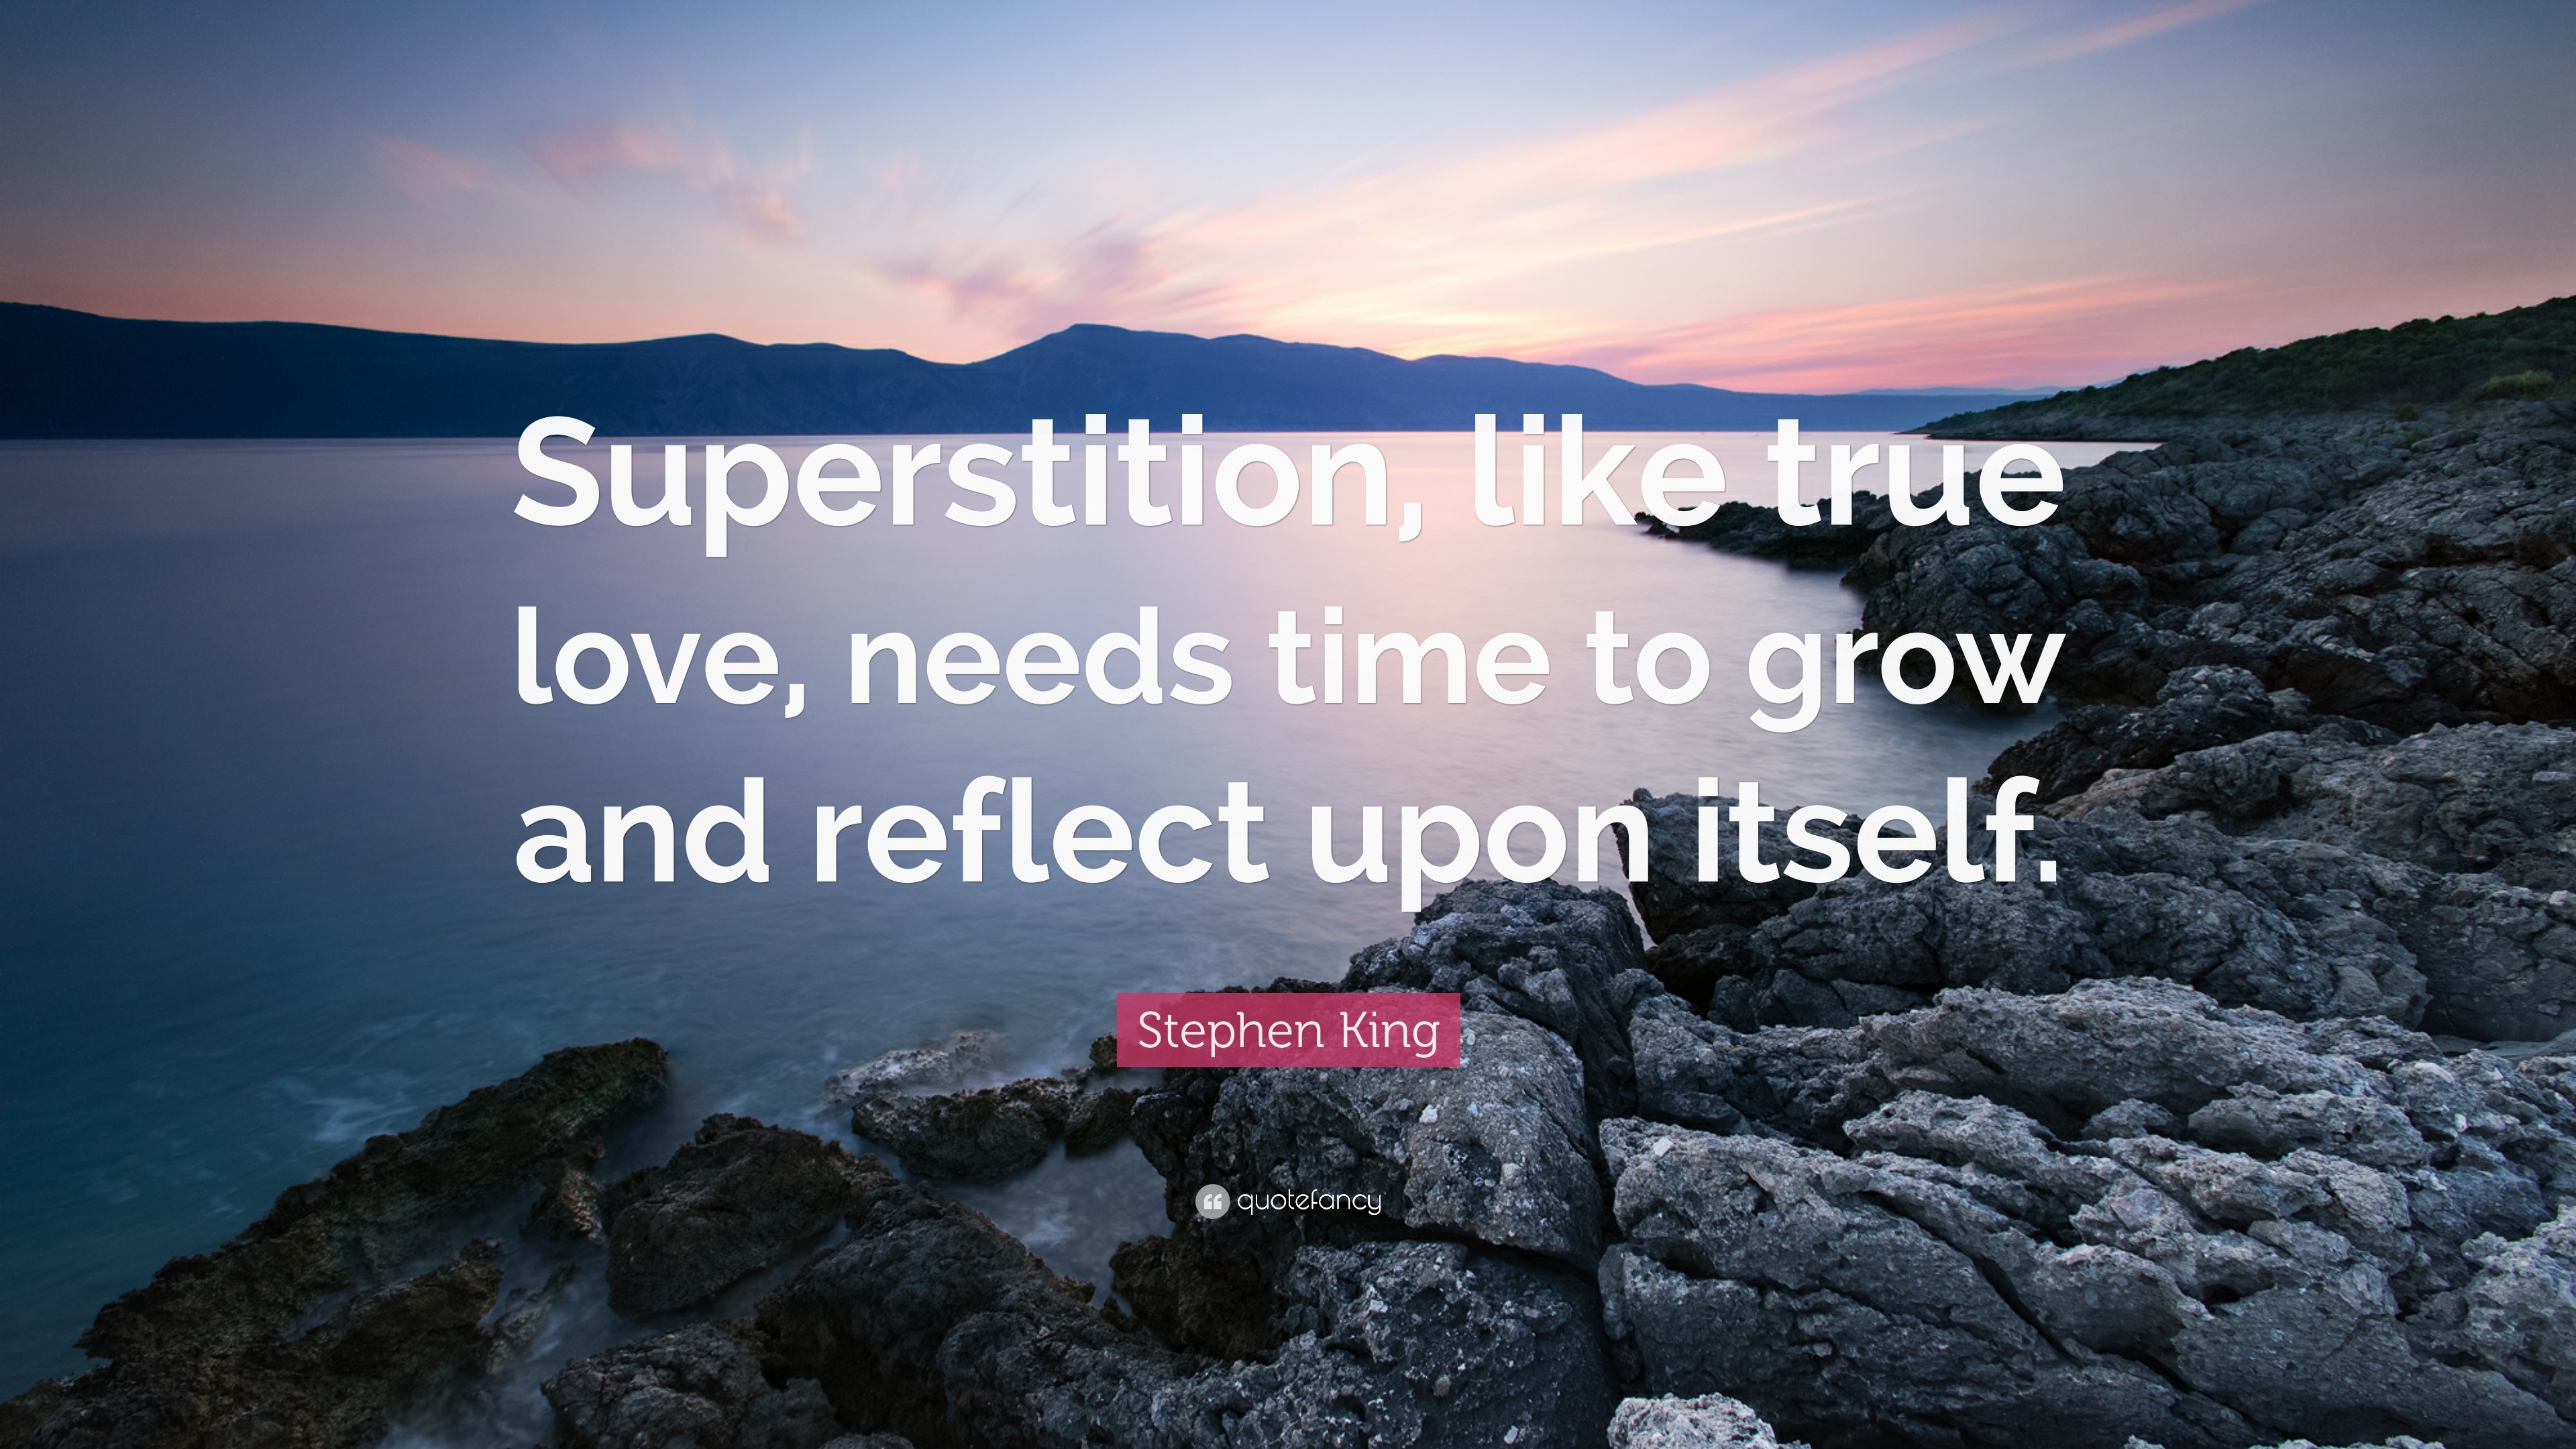 Stephen King Quote “Superstition like true love needs time to grow and